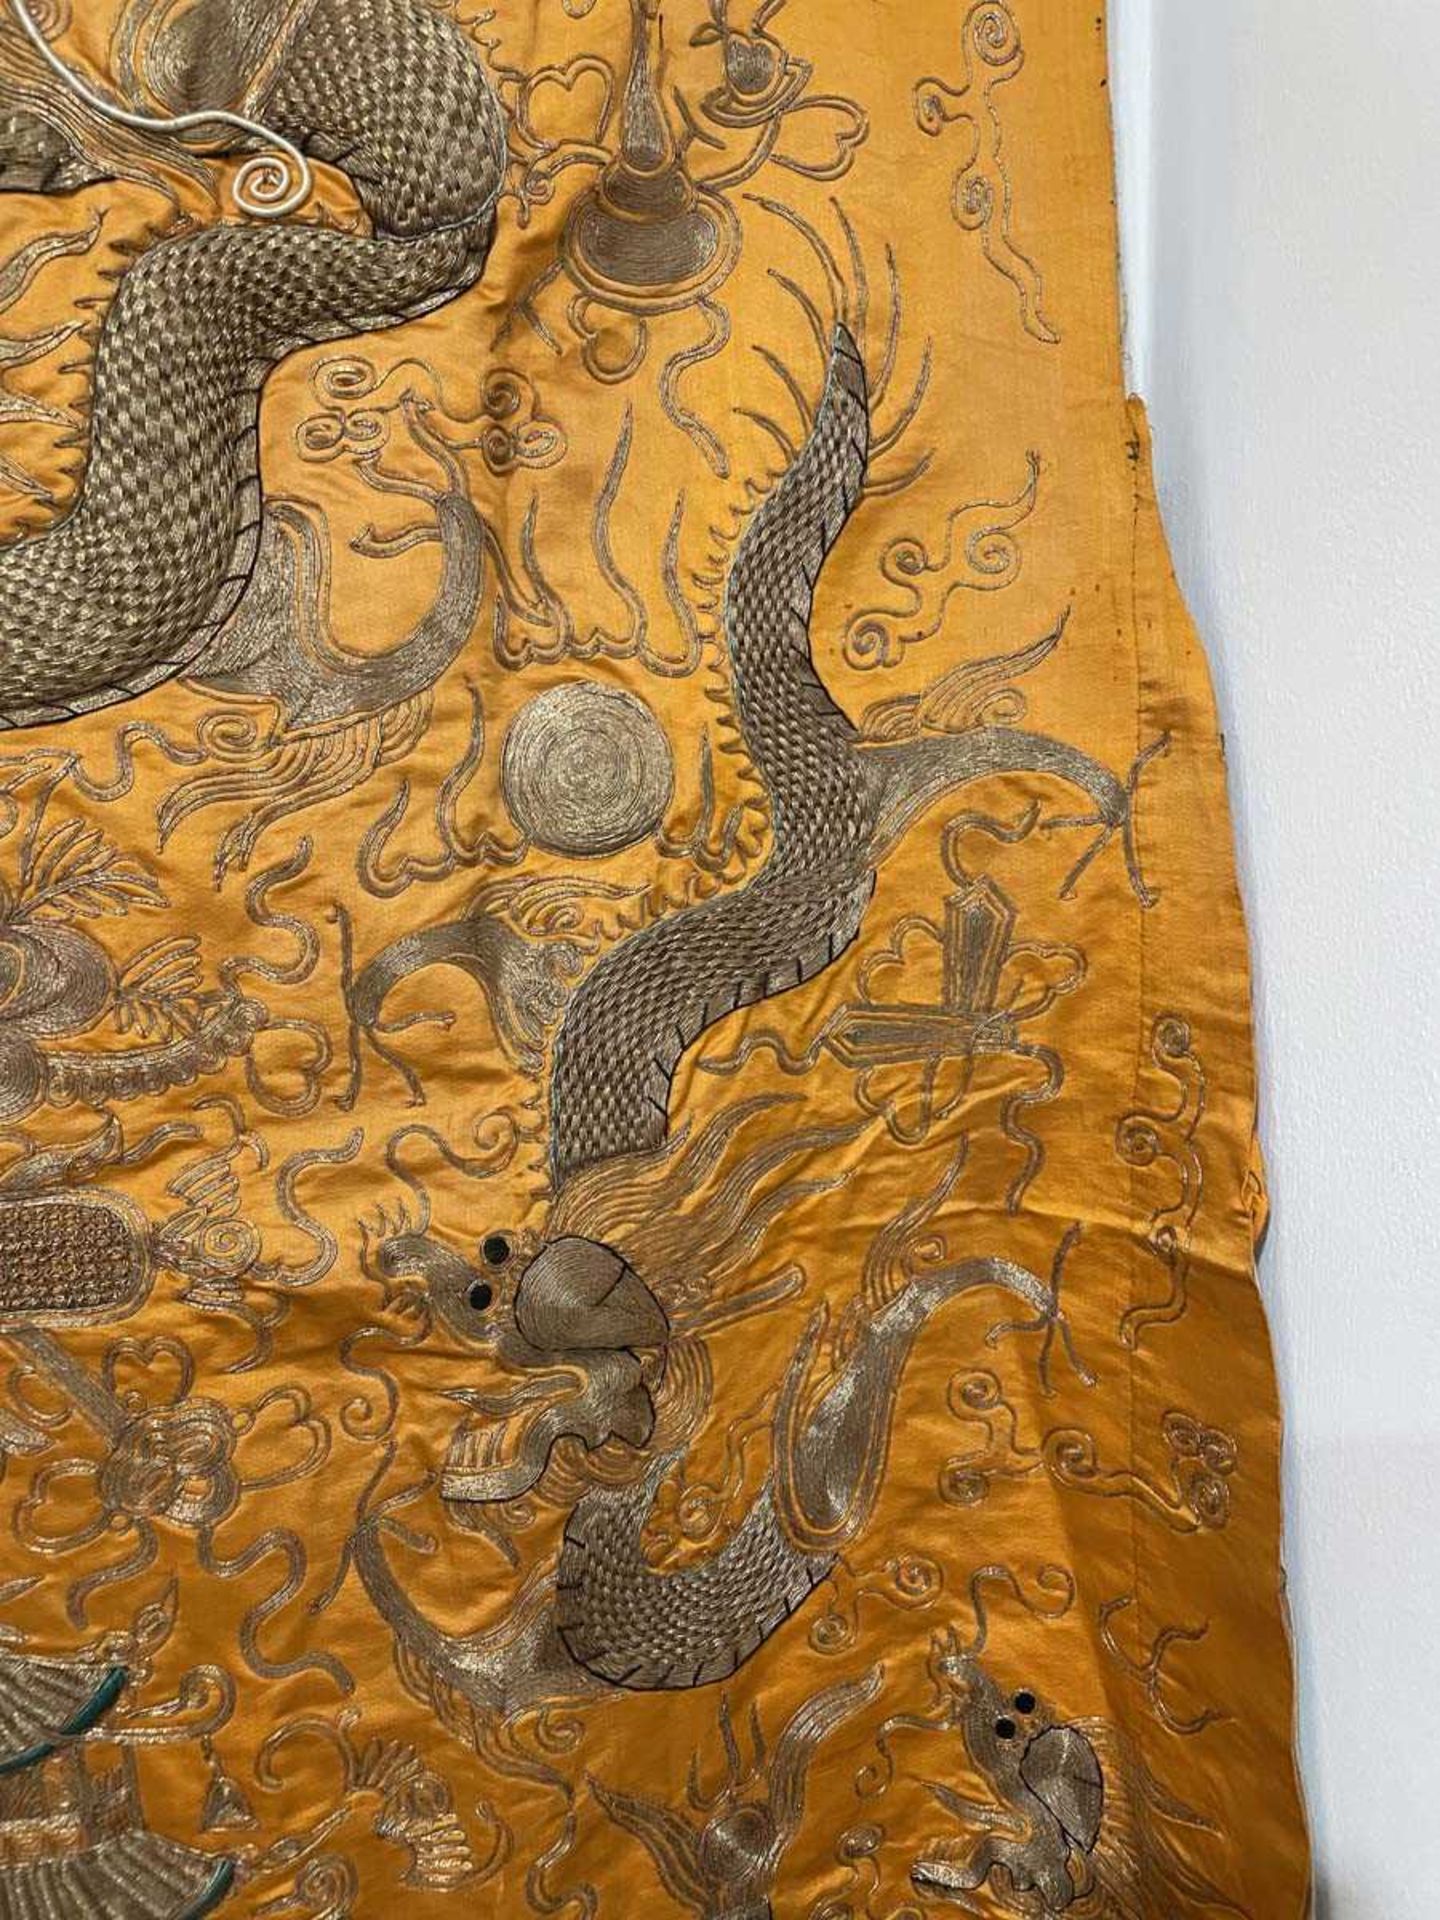 A Chinese robe section worked in gold coloured threads depicting dragons and a pagoda on an orange - Bild 15 aus 15